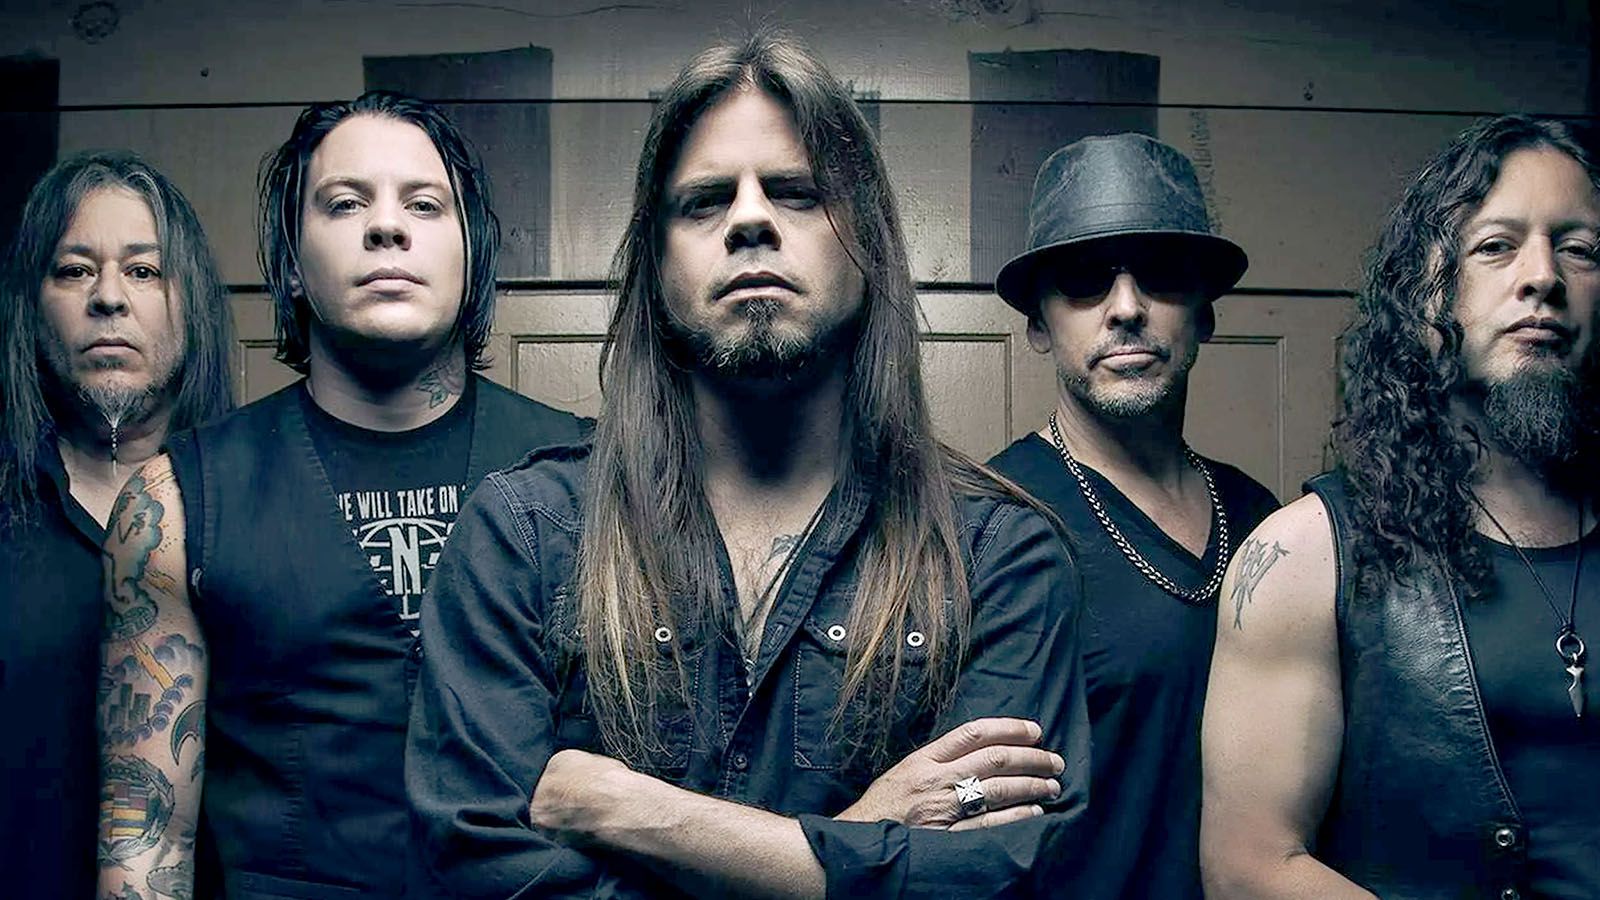 Queensryche will be at The Clyde on March 29.